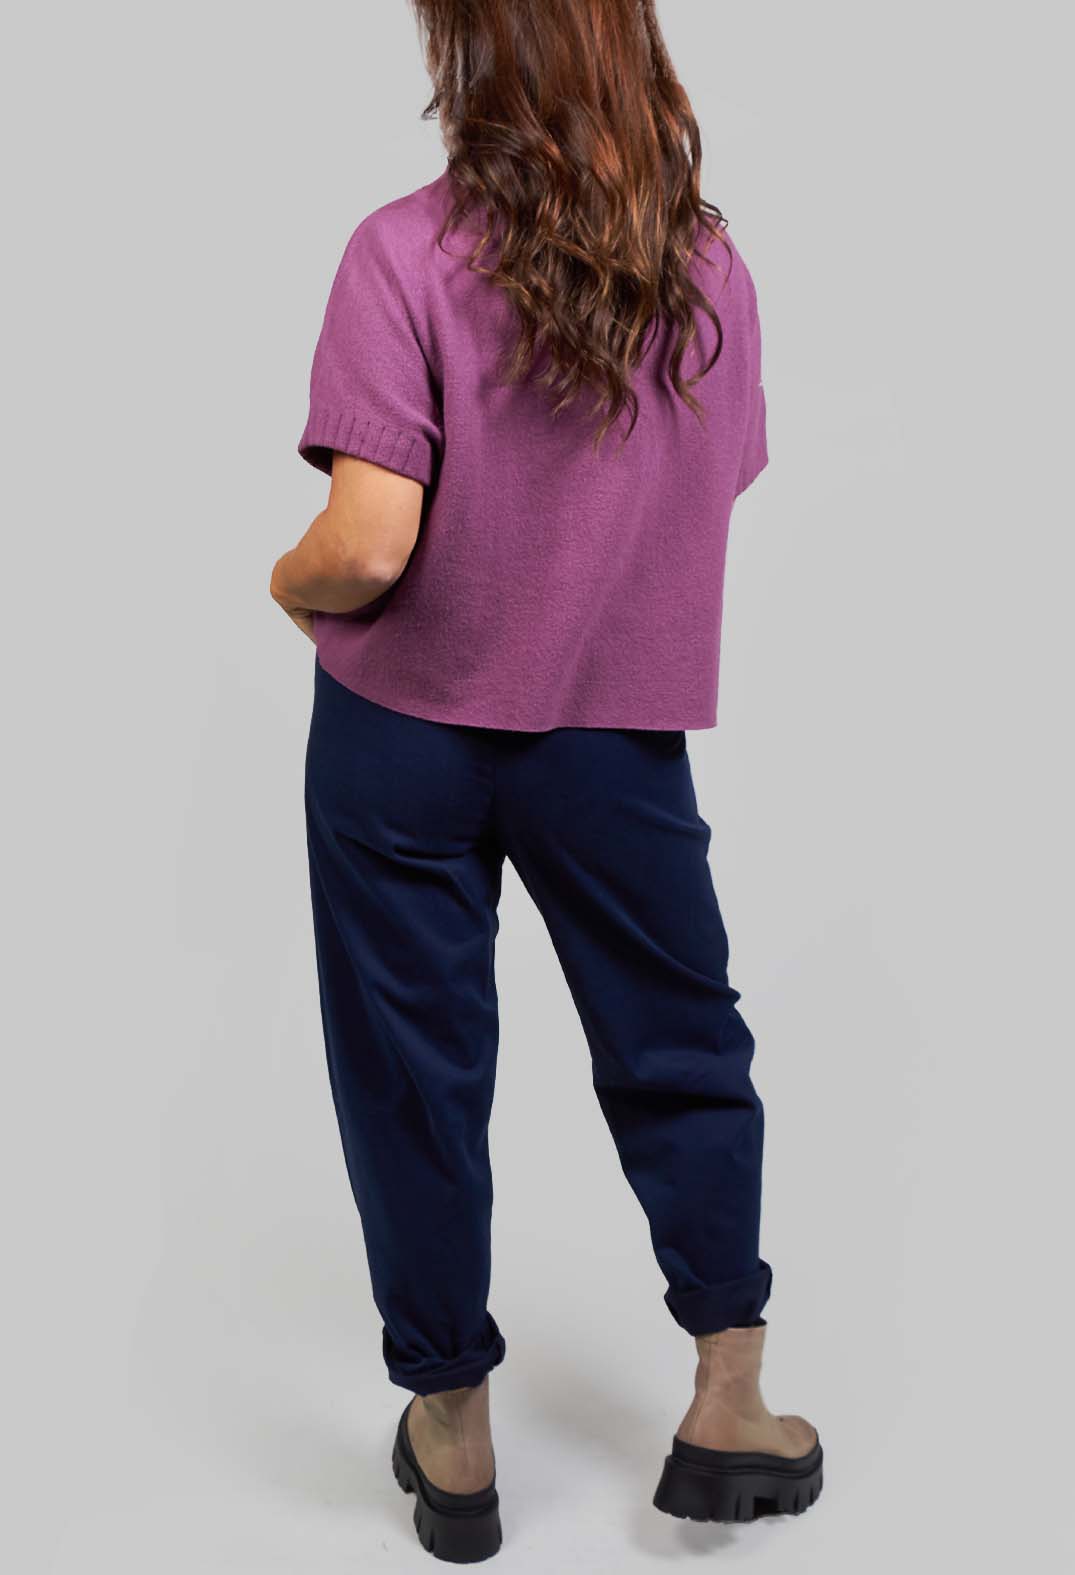 Tonk Pants in BlueBerry with Tie Front